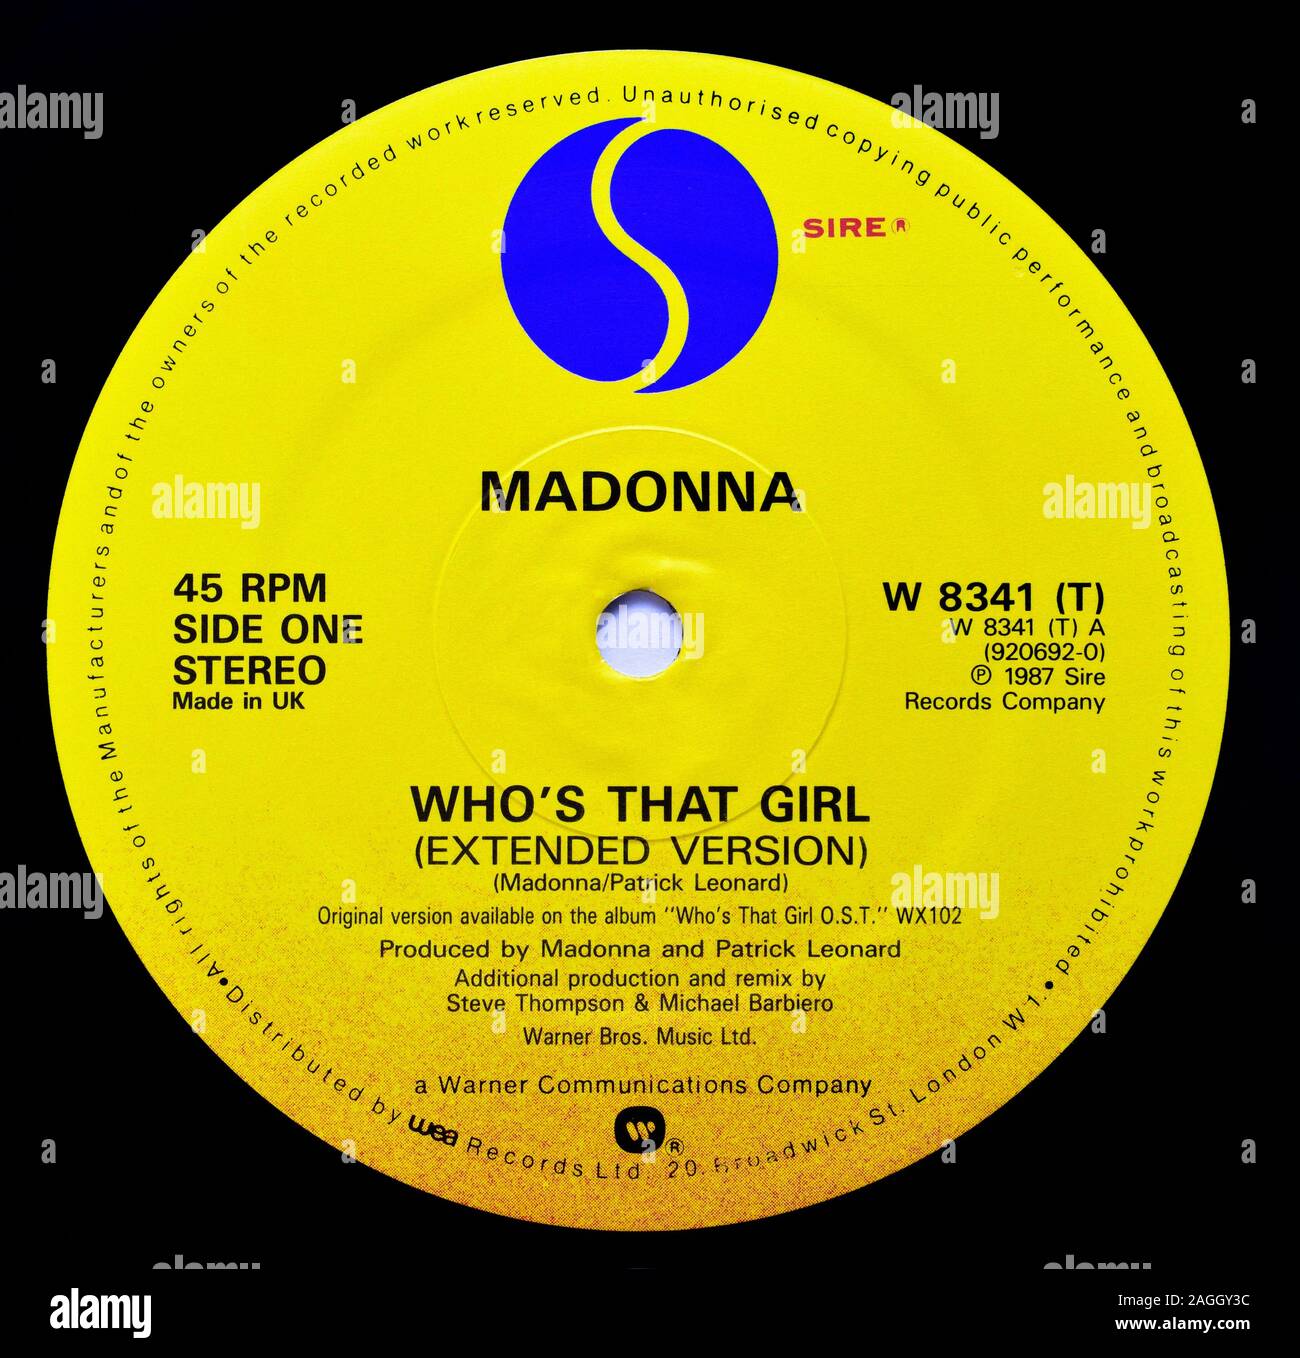 Madonna Who's that girl extended version vinyl record label Stock Photo